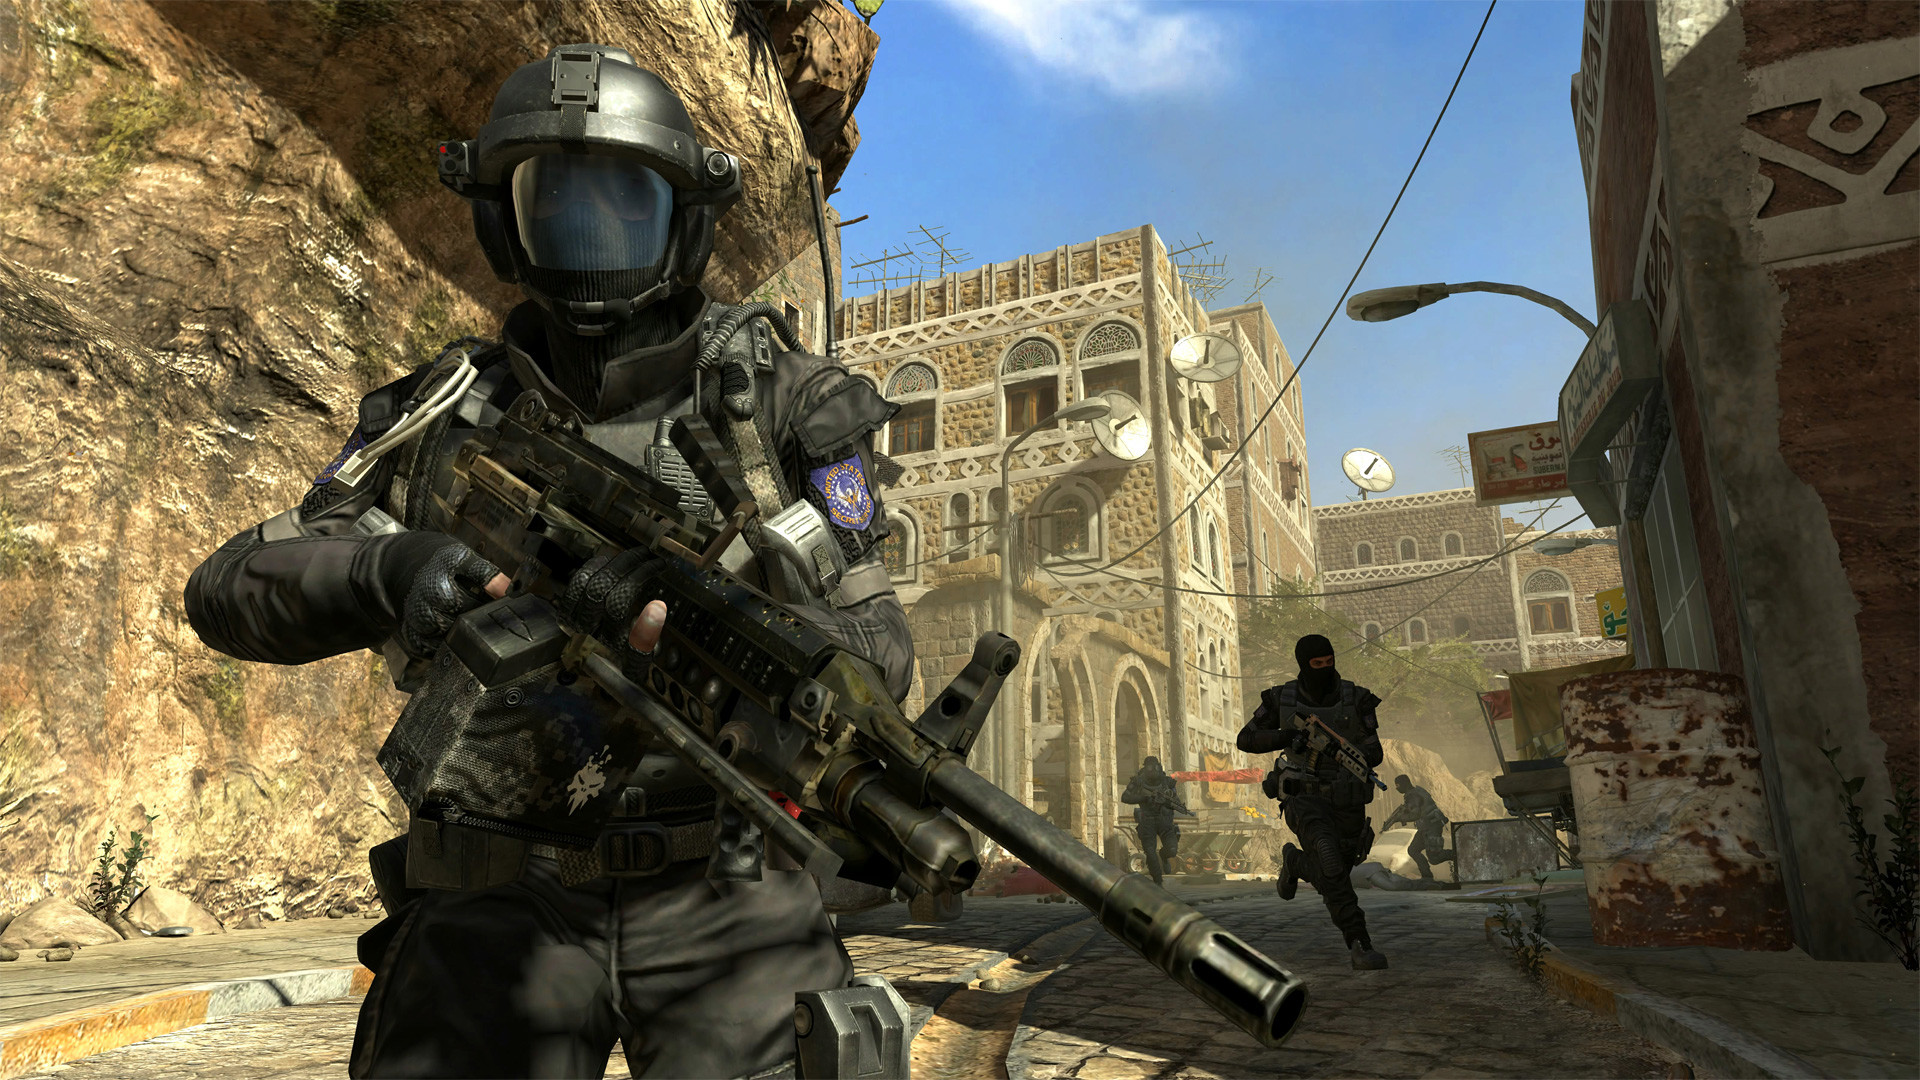 1920x1080 Call of Duty: Black Ops 2 Image ...